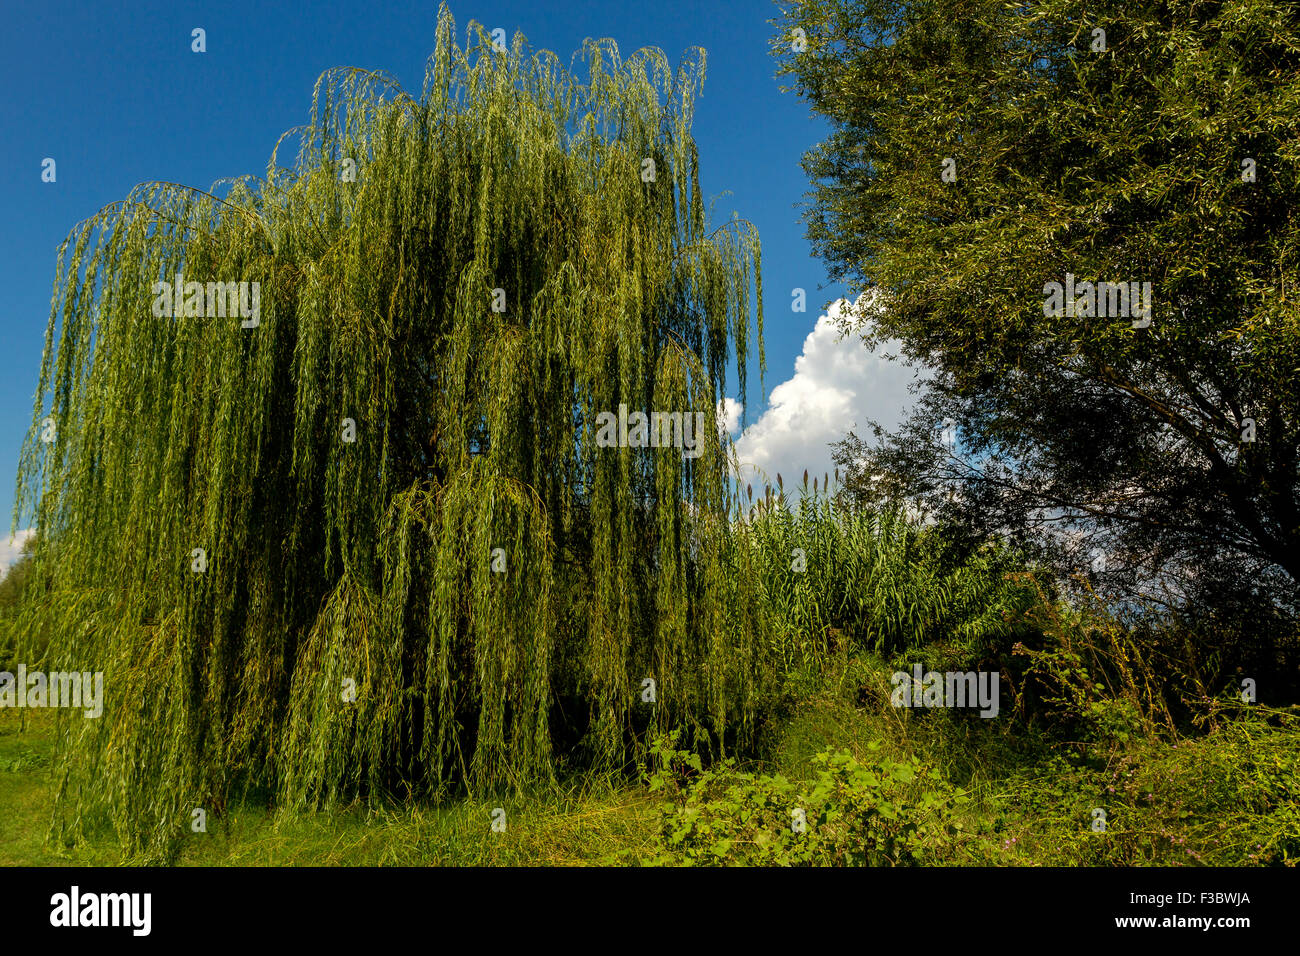 Weeping willow, on the banks of the lake Trichonida, in Greece. Stock Photo